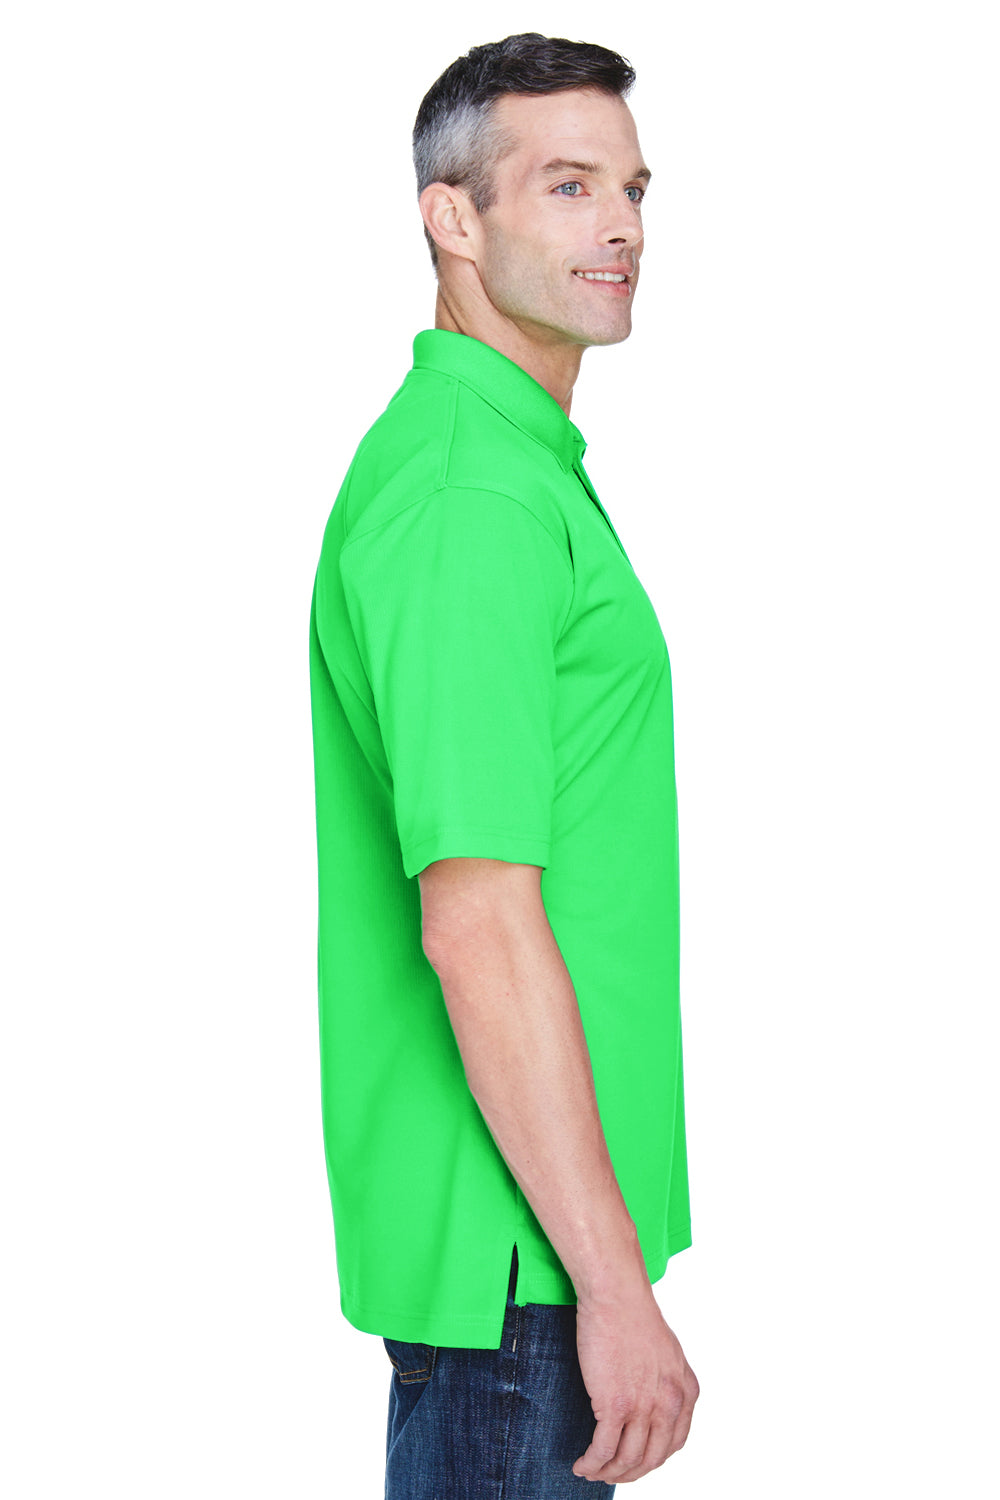 UltraClub 8445 Mens Cool & Dry Performance Moisture Wicking Short Sleeve Polo Shirt Cool Green Side